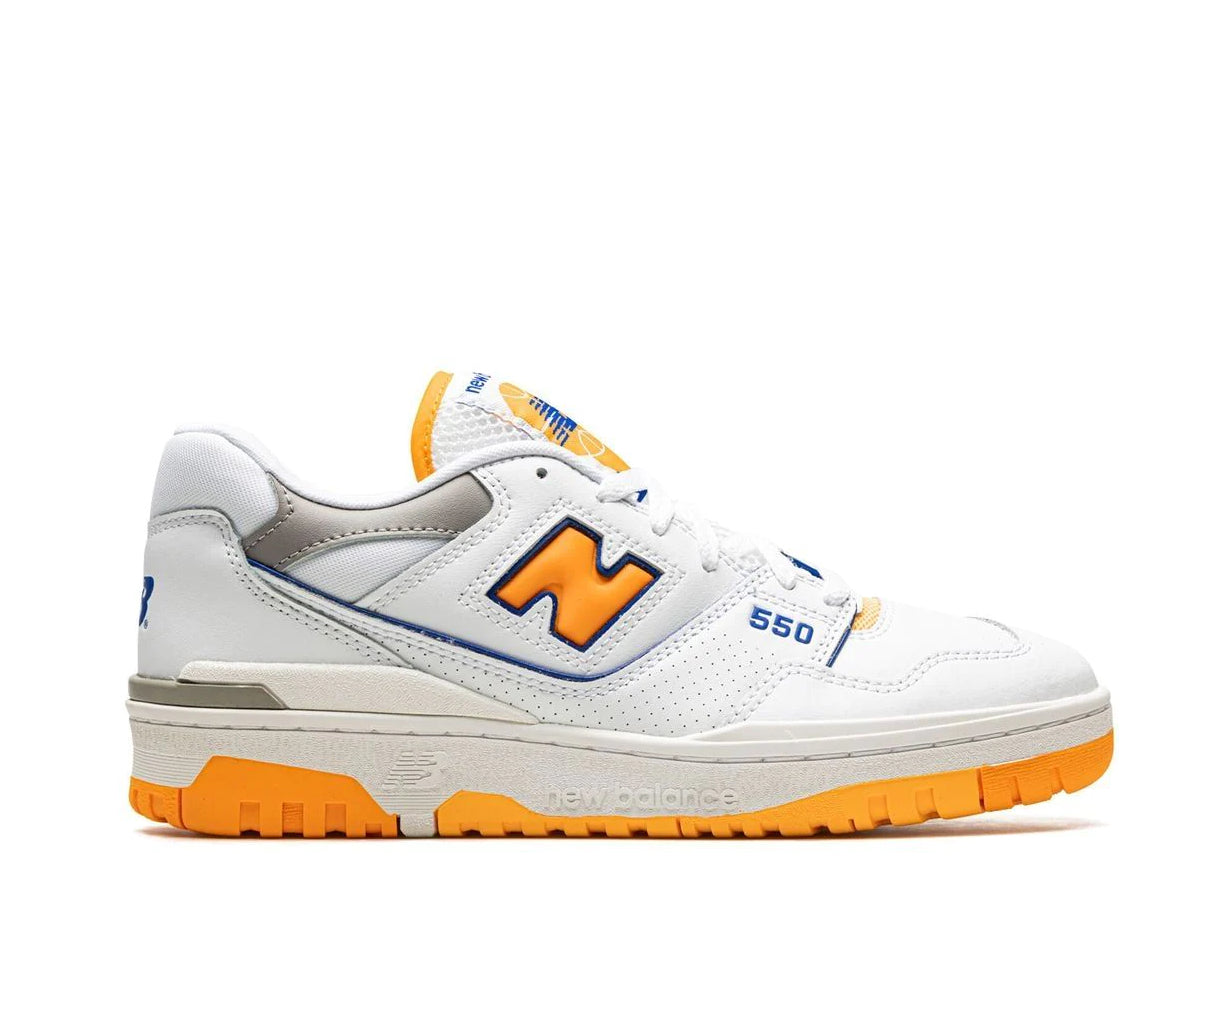 A white leather New Balance basketball shoe with orange and indigo accents.